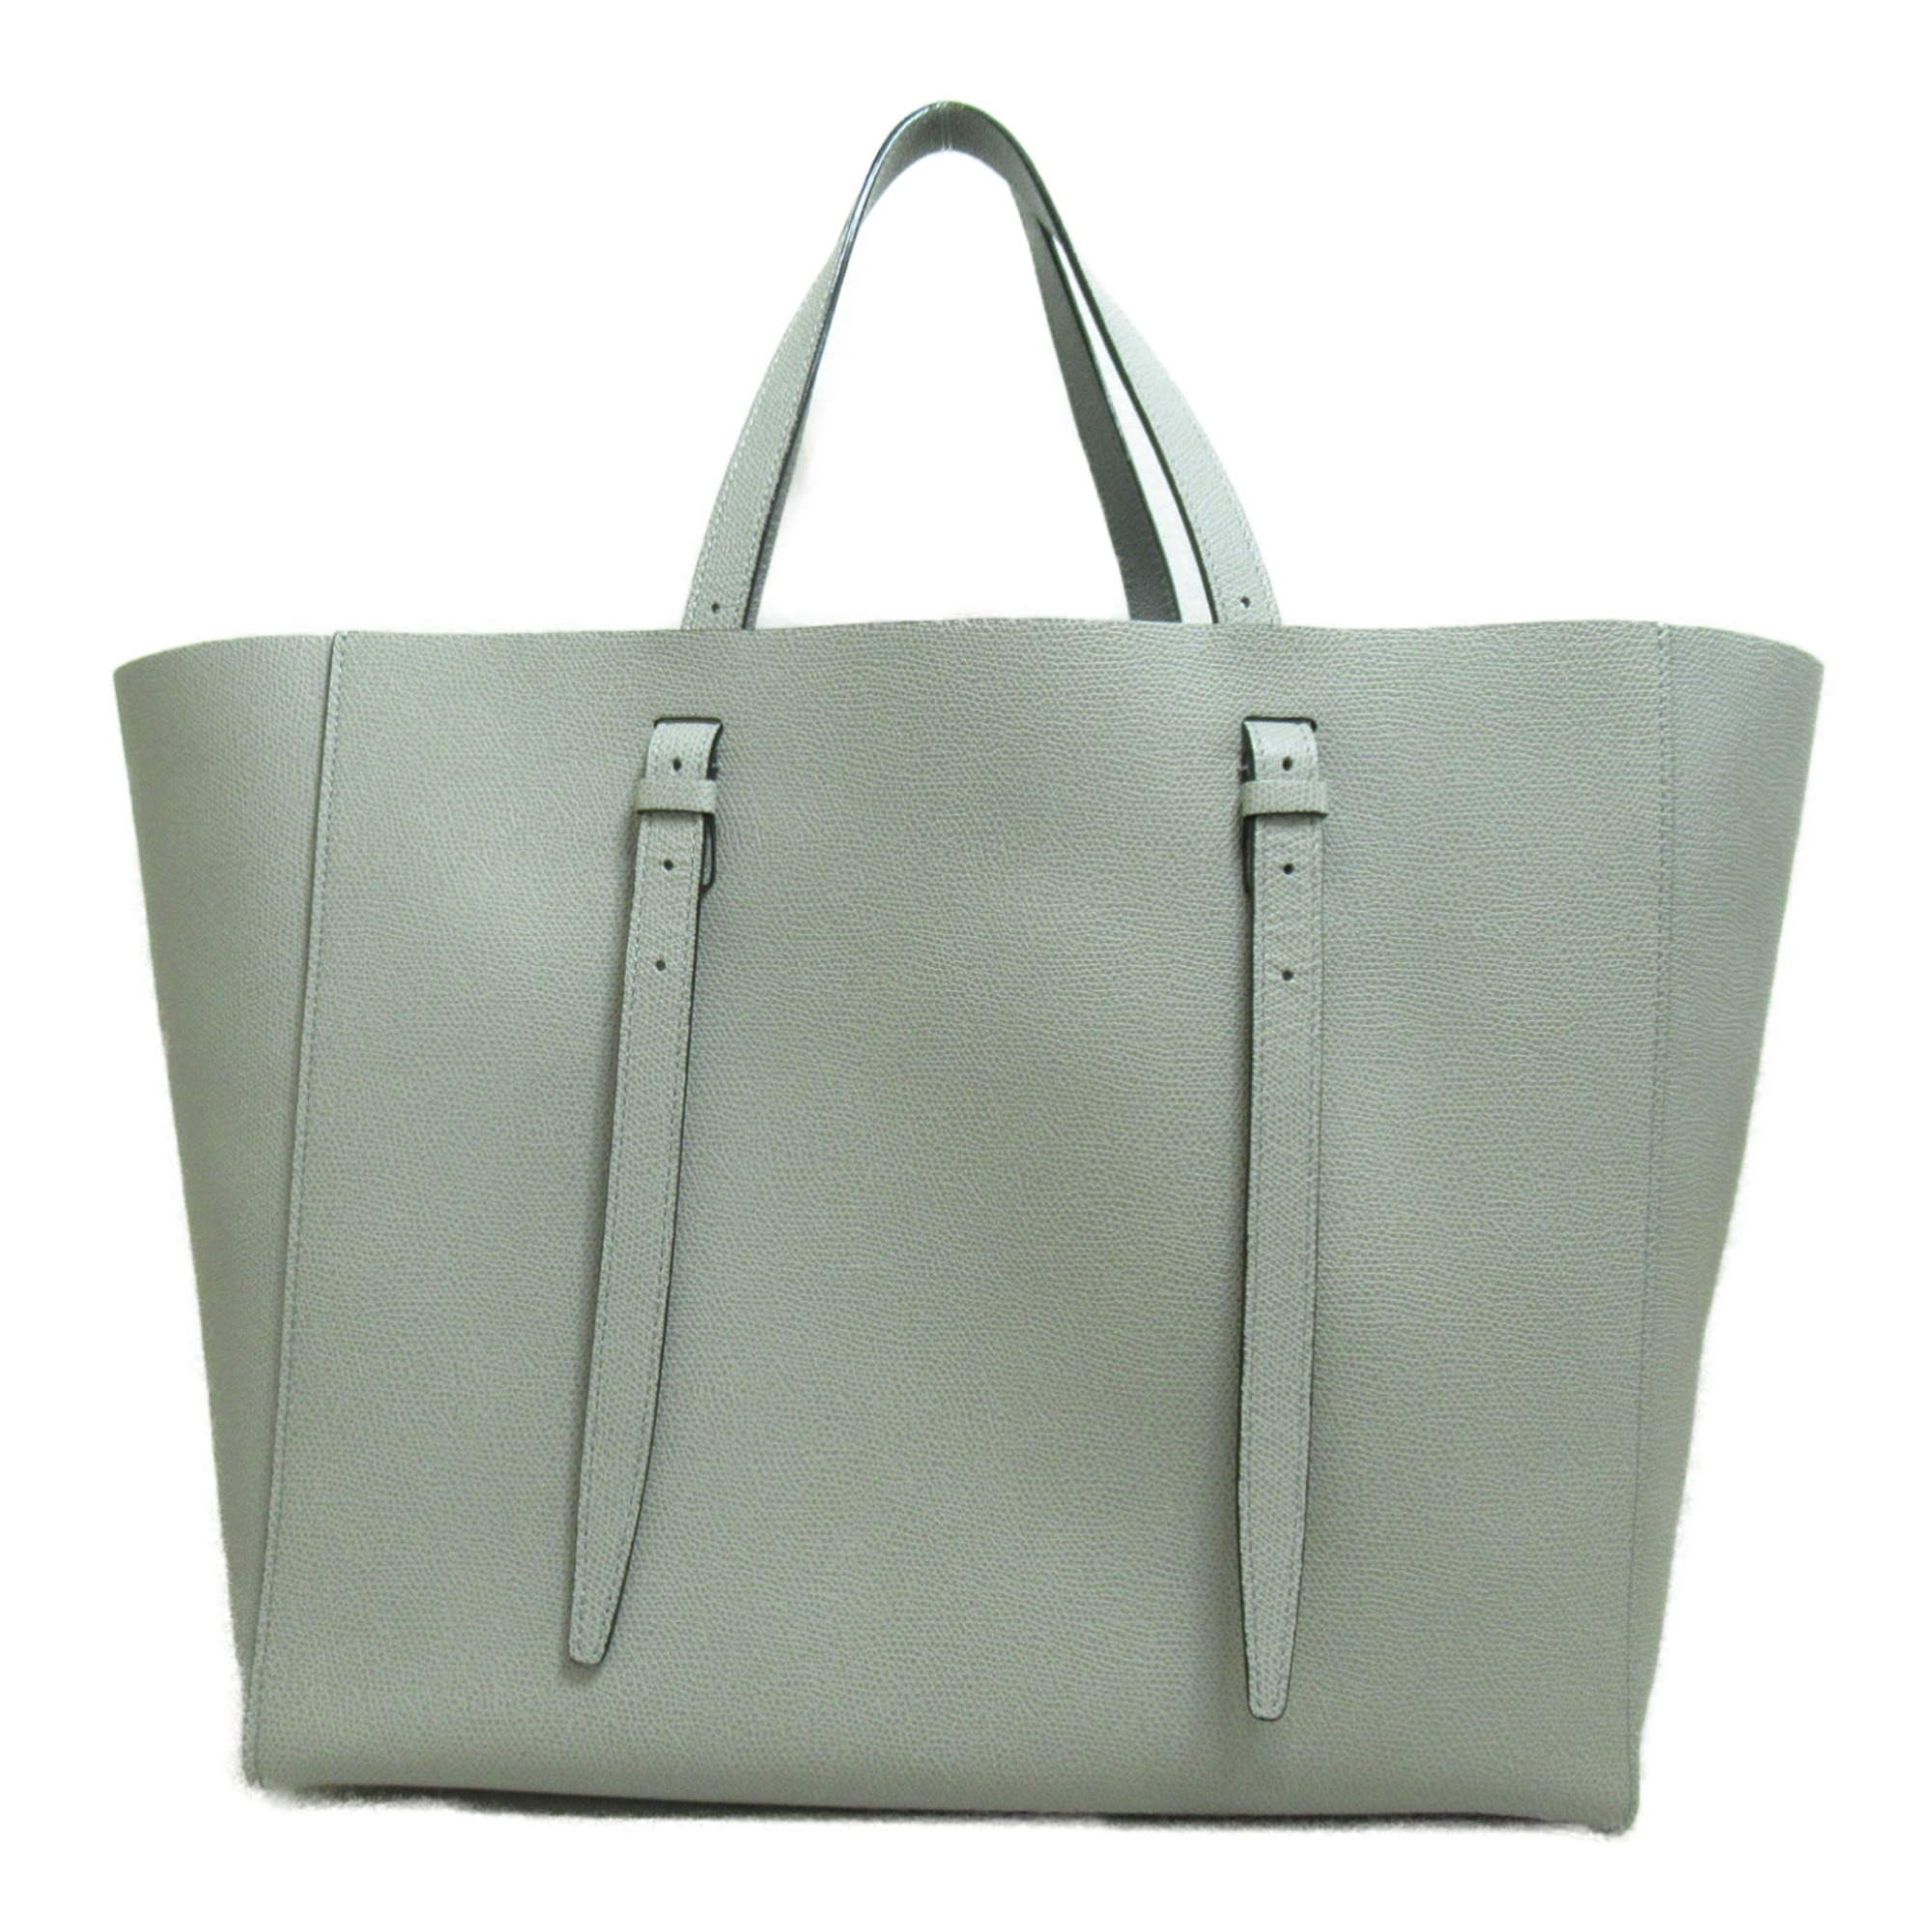 Valextra soft tote bag Gray Light gray leather